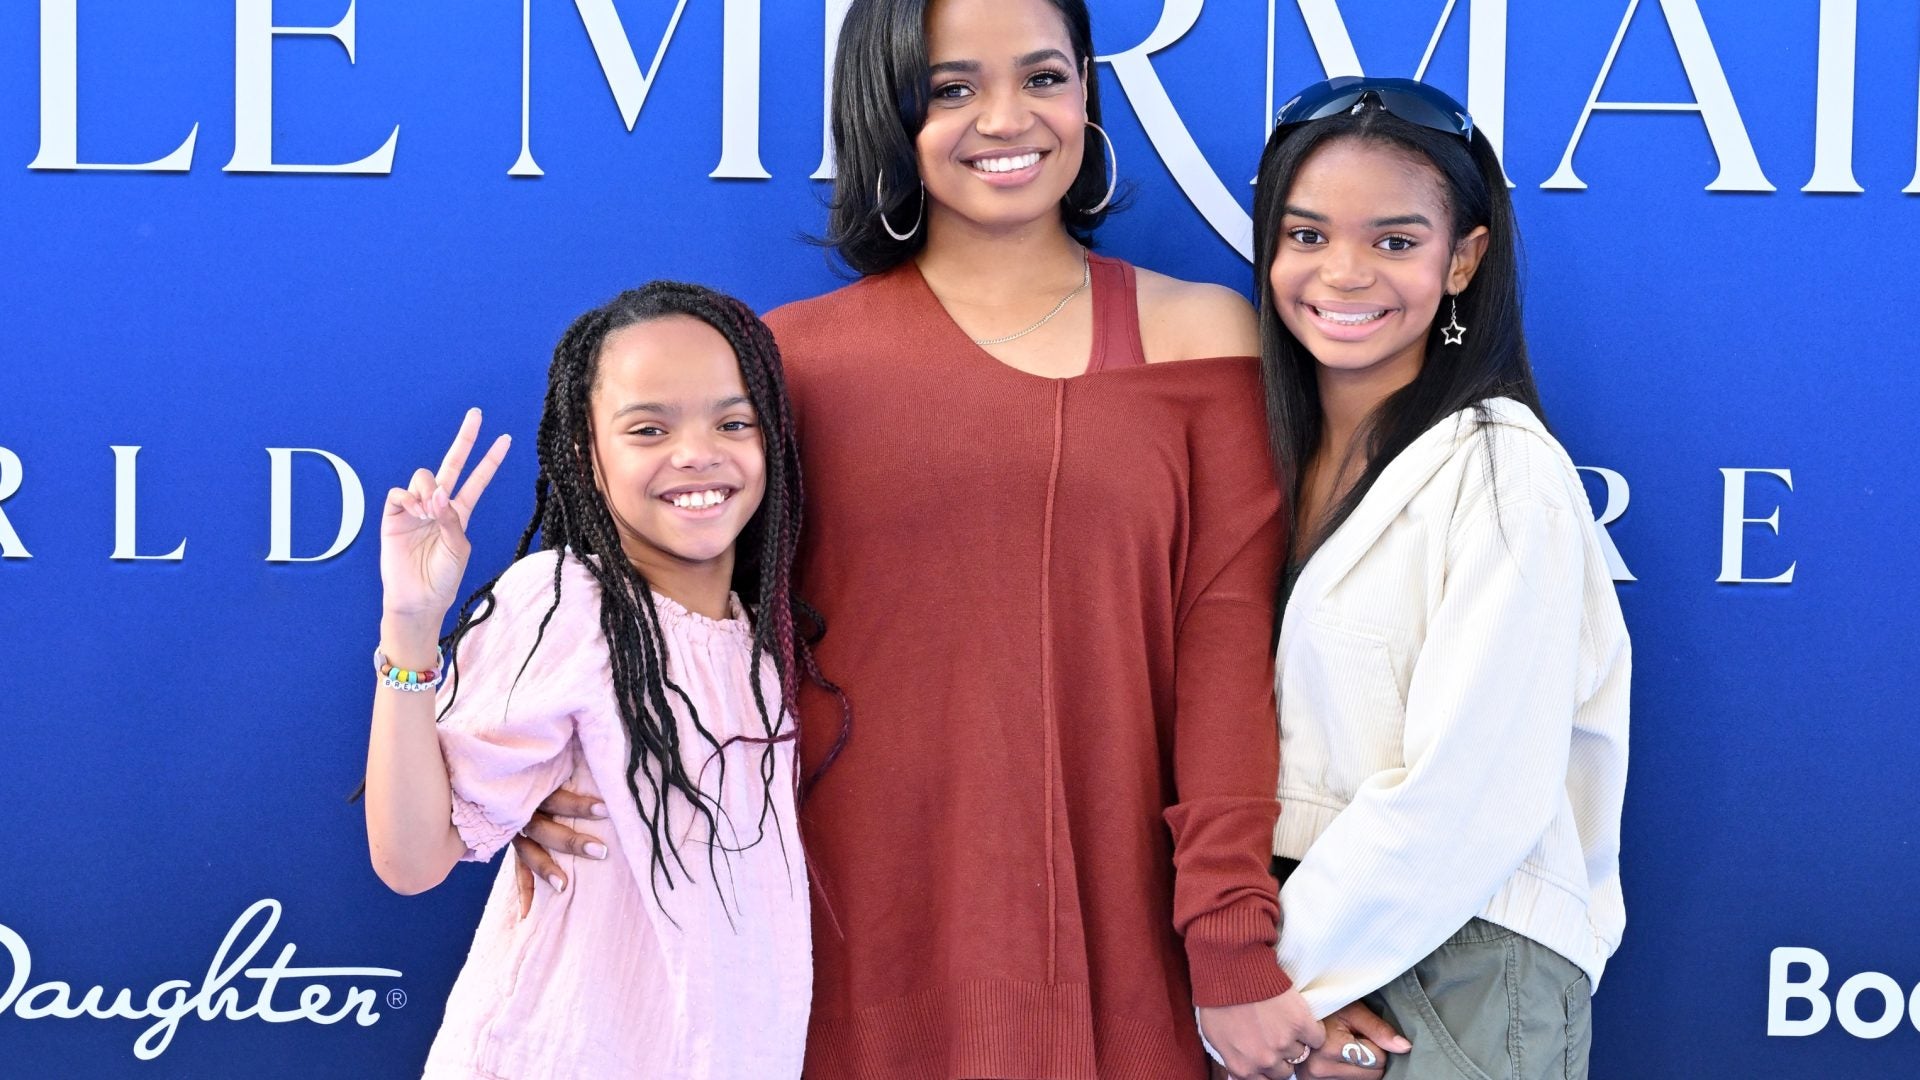 Kyla Pratt Says Being Dismissed By A Nurse Resulted In An Emergency C-Section